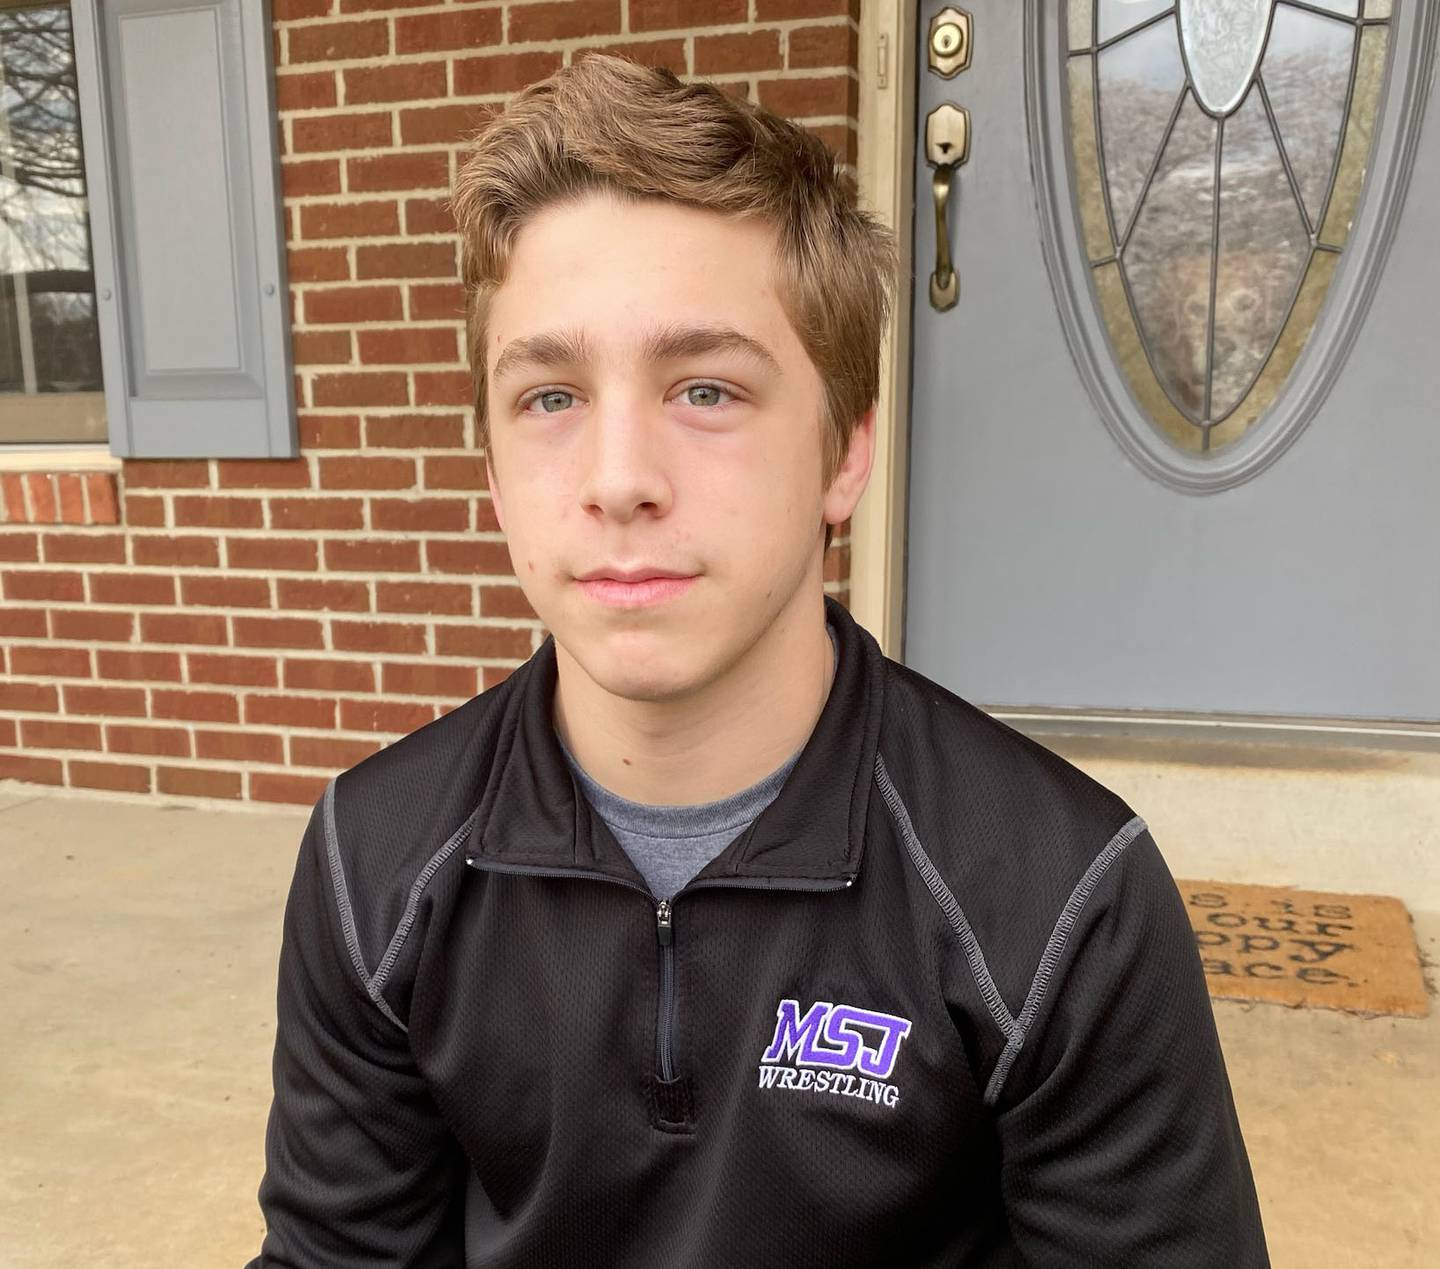 Mount St. Joseph senior Coleman Nogle faced many challenges during his high school career but he kept improving. He saved his best for a brilliant senior season, establishing himself as one of the top-ranked national wrestlers in his weight class and earning the title of 2022-23 Baltimore Banner/VSN Lower Weight Wrestler of the Year.